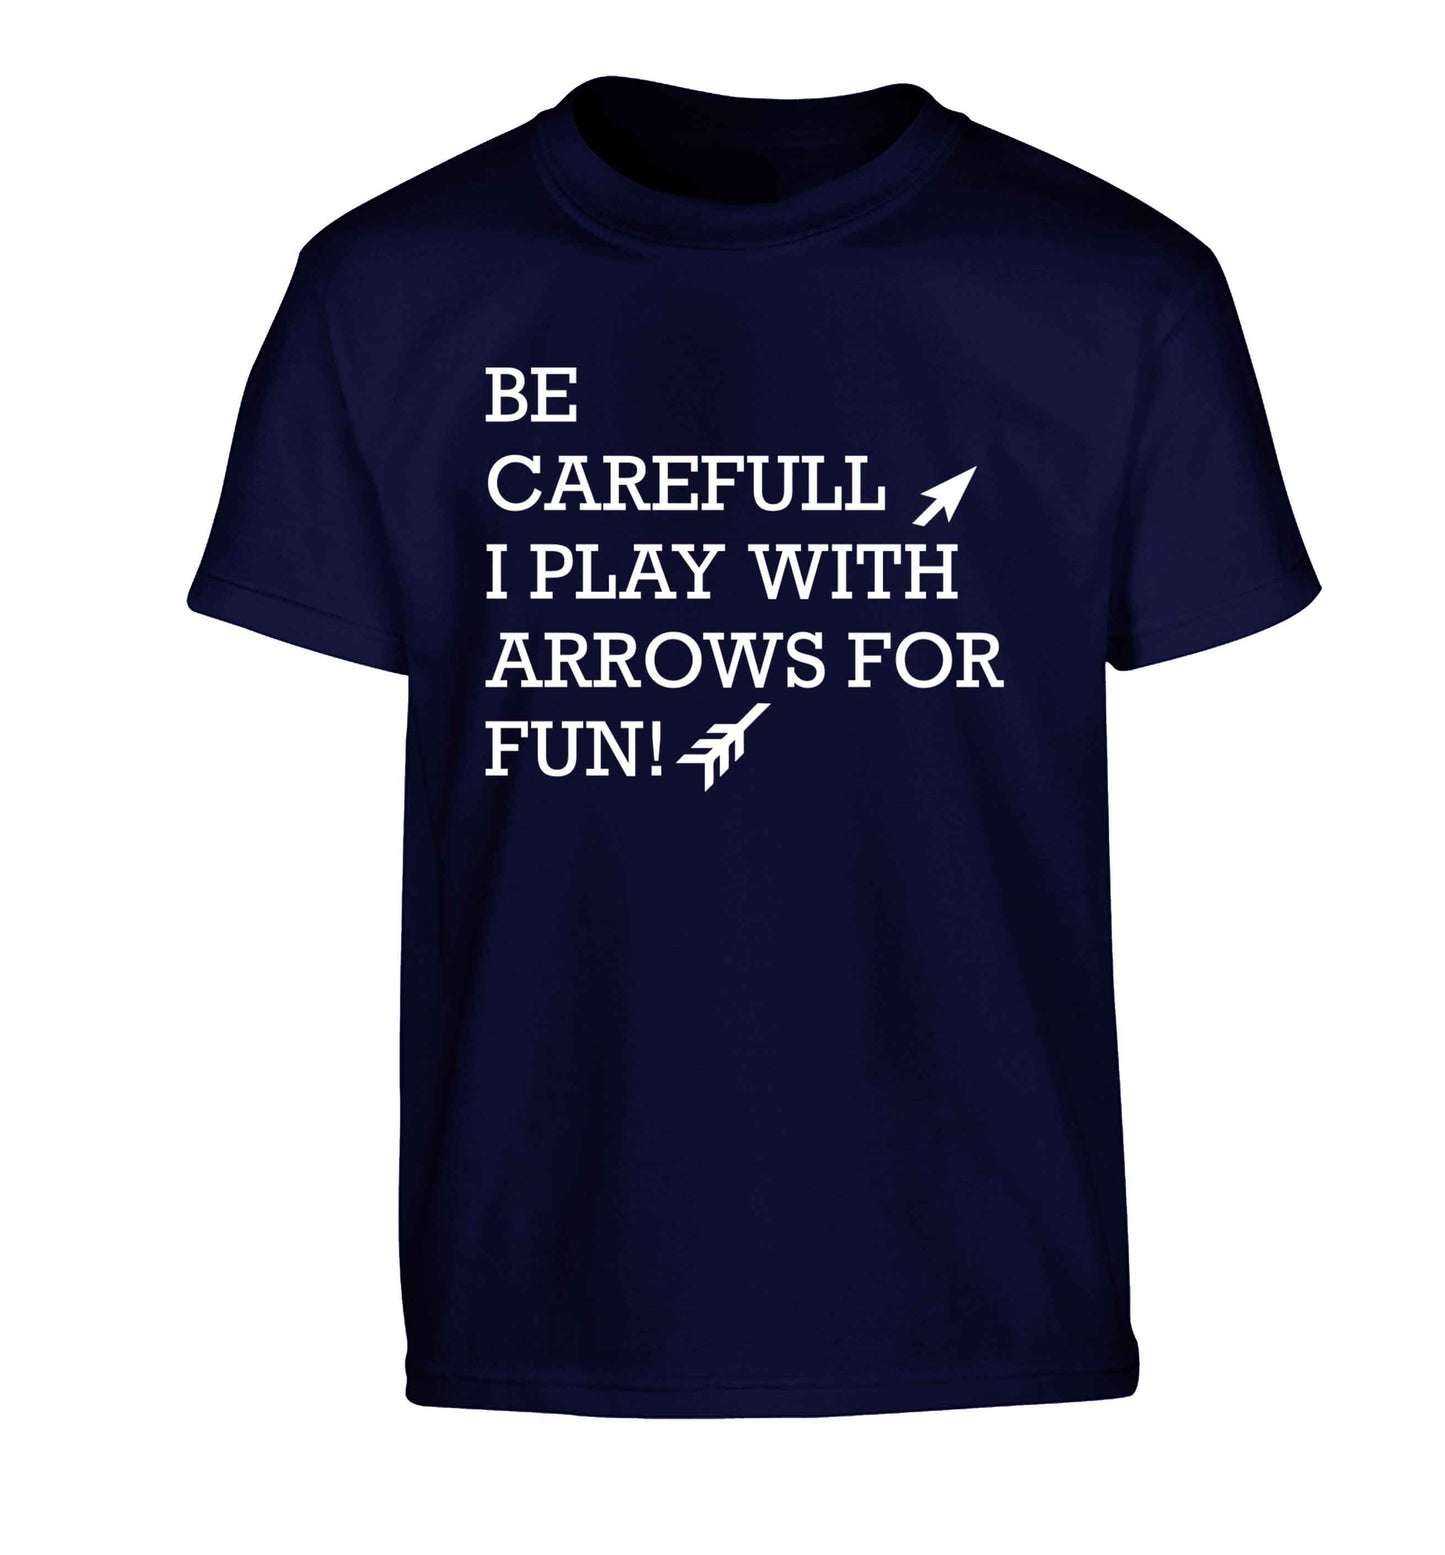 Be carefull I play with arrows for fun Children's navy Tshirt 12-13 Years